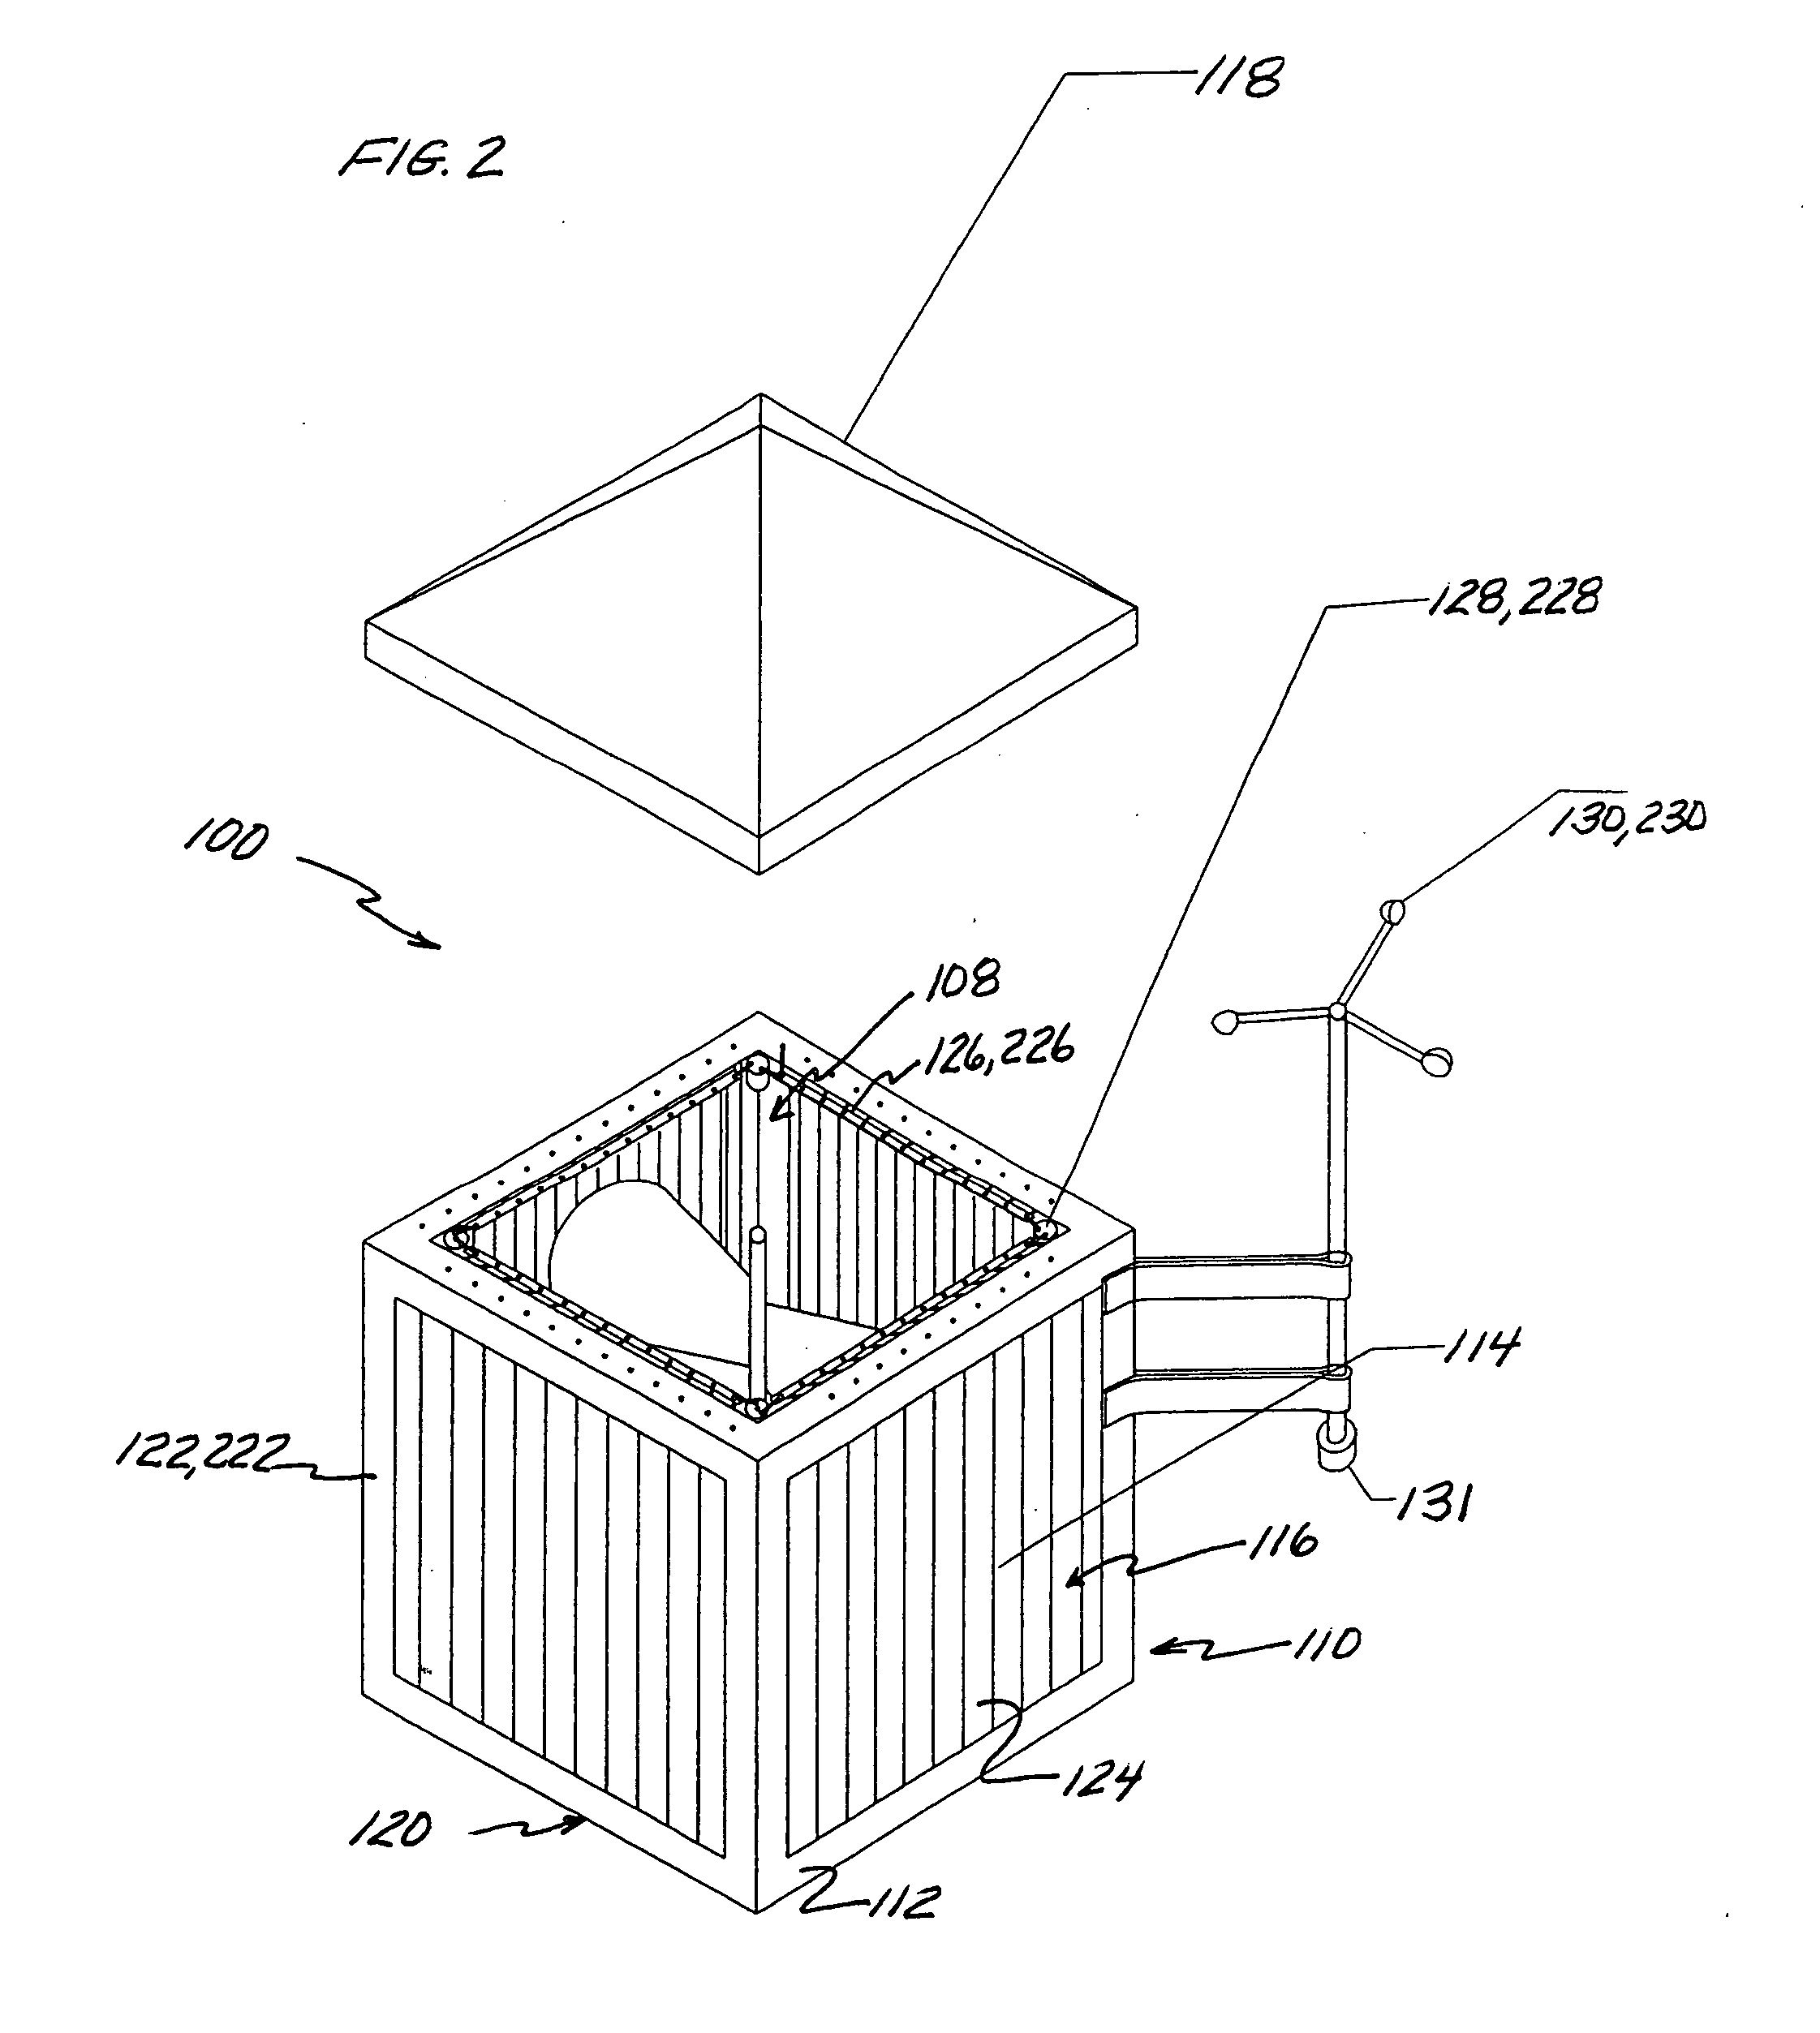 Wind generator with energy enhancer element for providing energy at no wind and low wind conditions